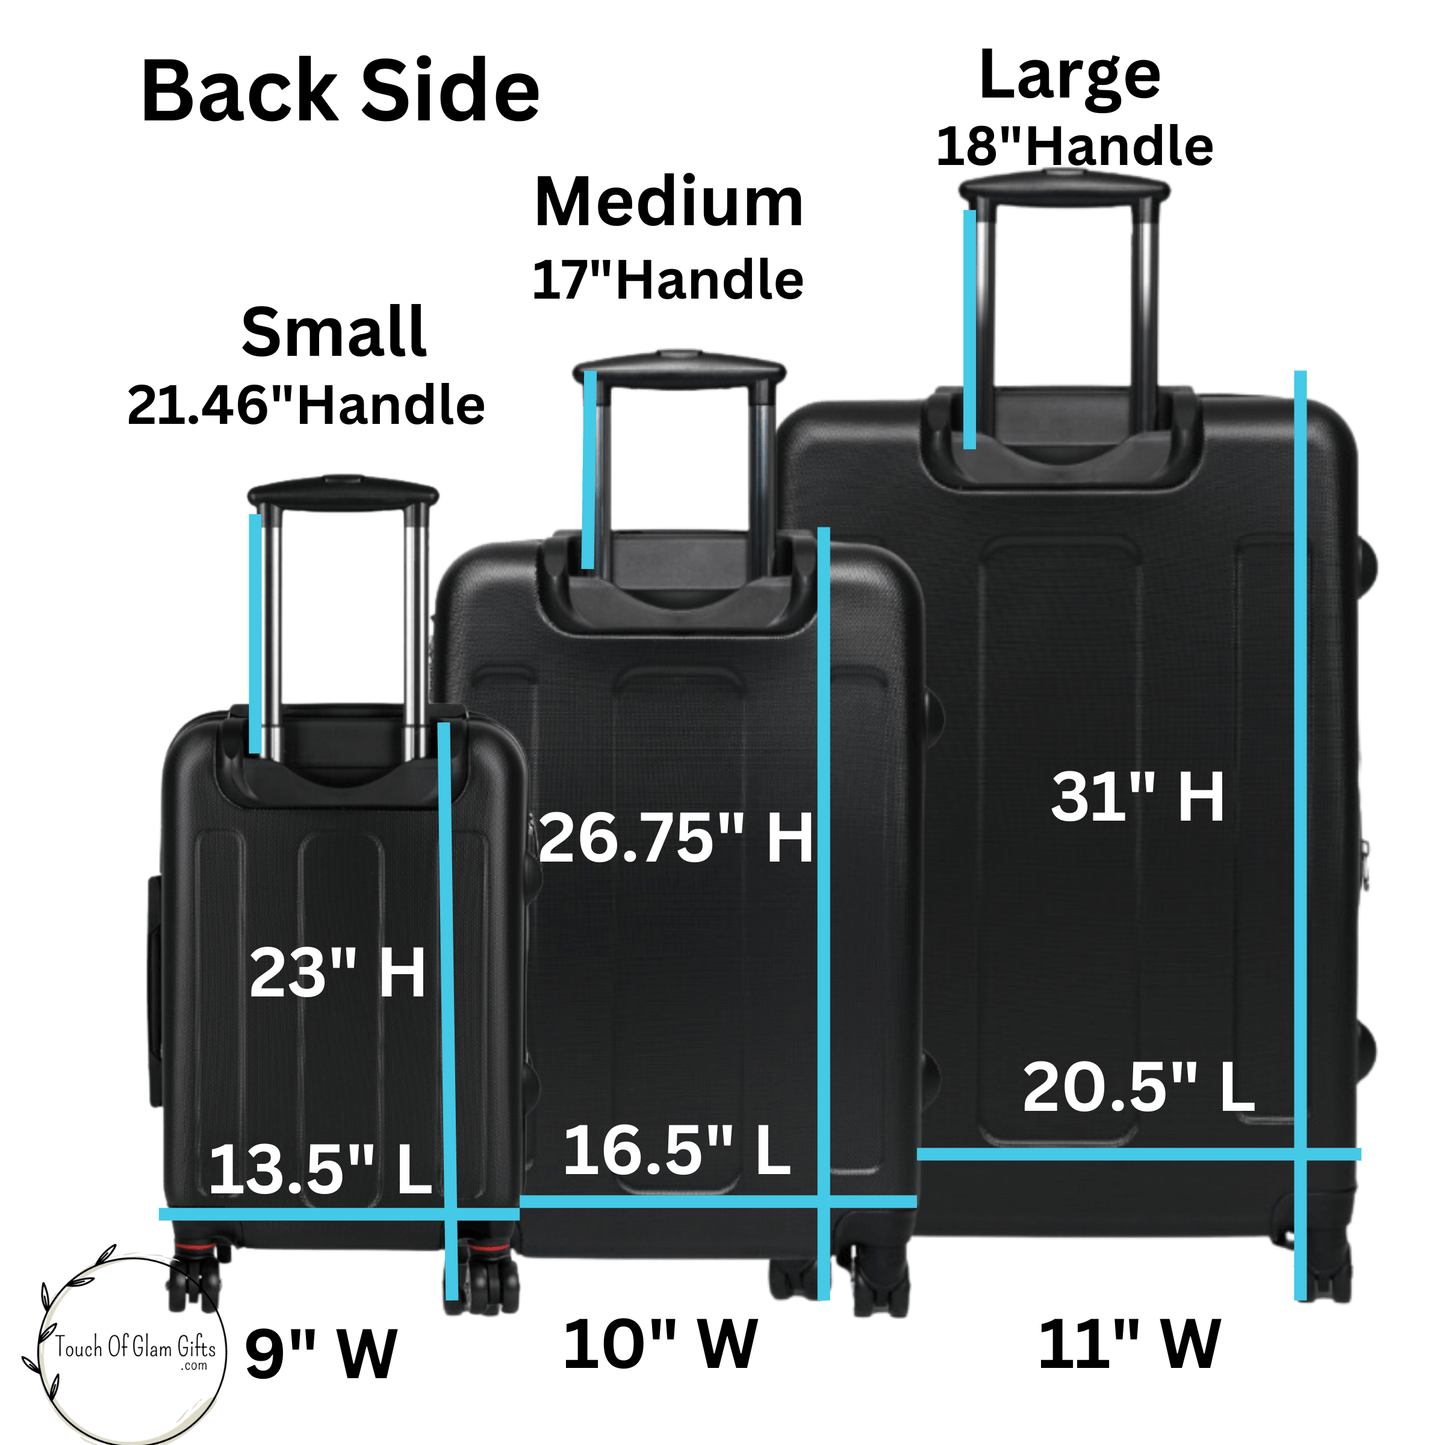 Personalized Cowhide Luggage Set #4, Cow Print Hard Shell Suitcases, Western Style Luggage